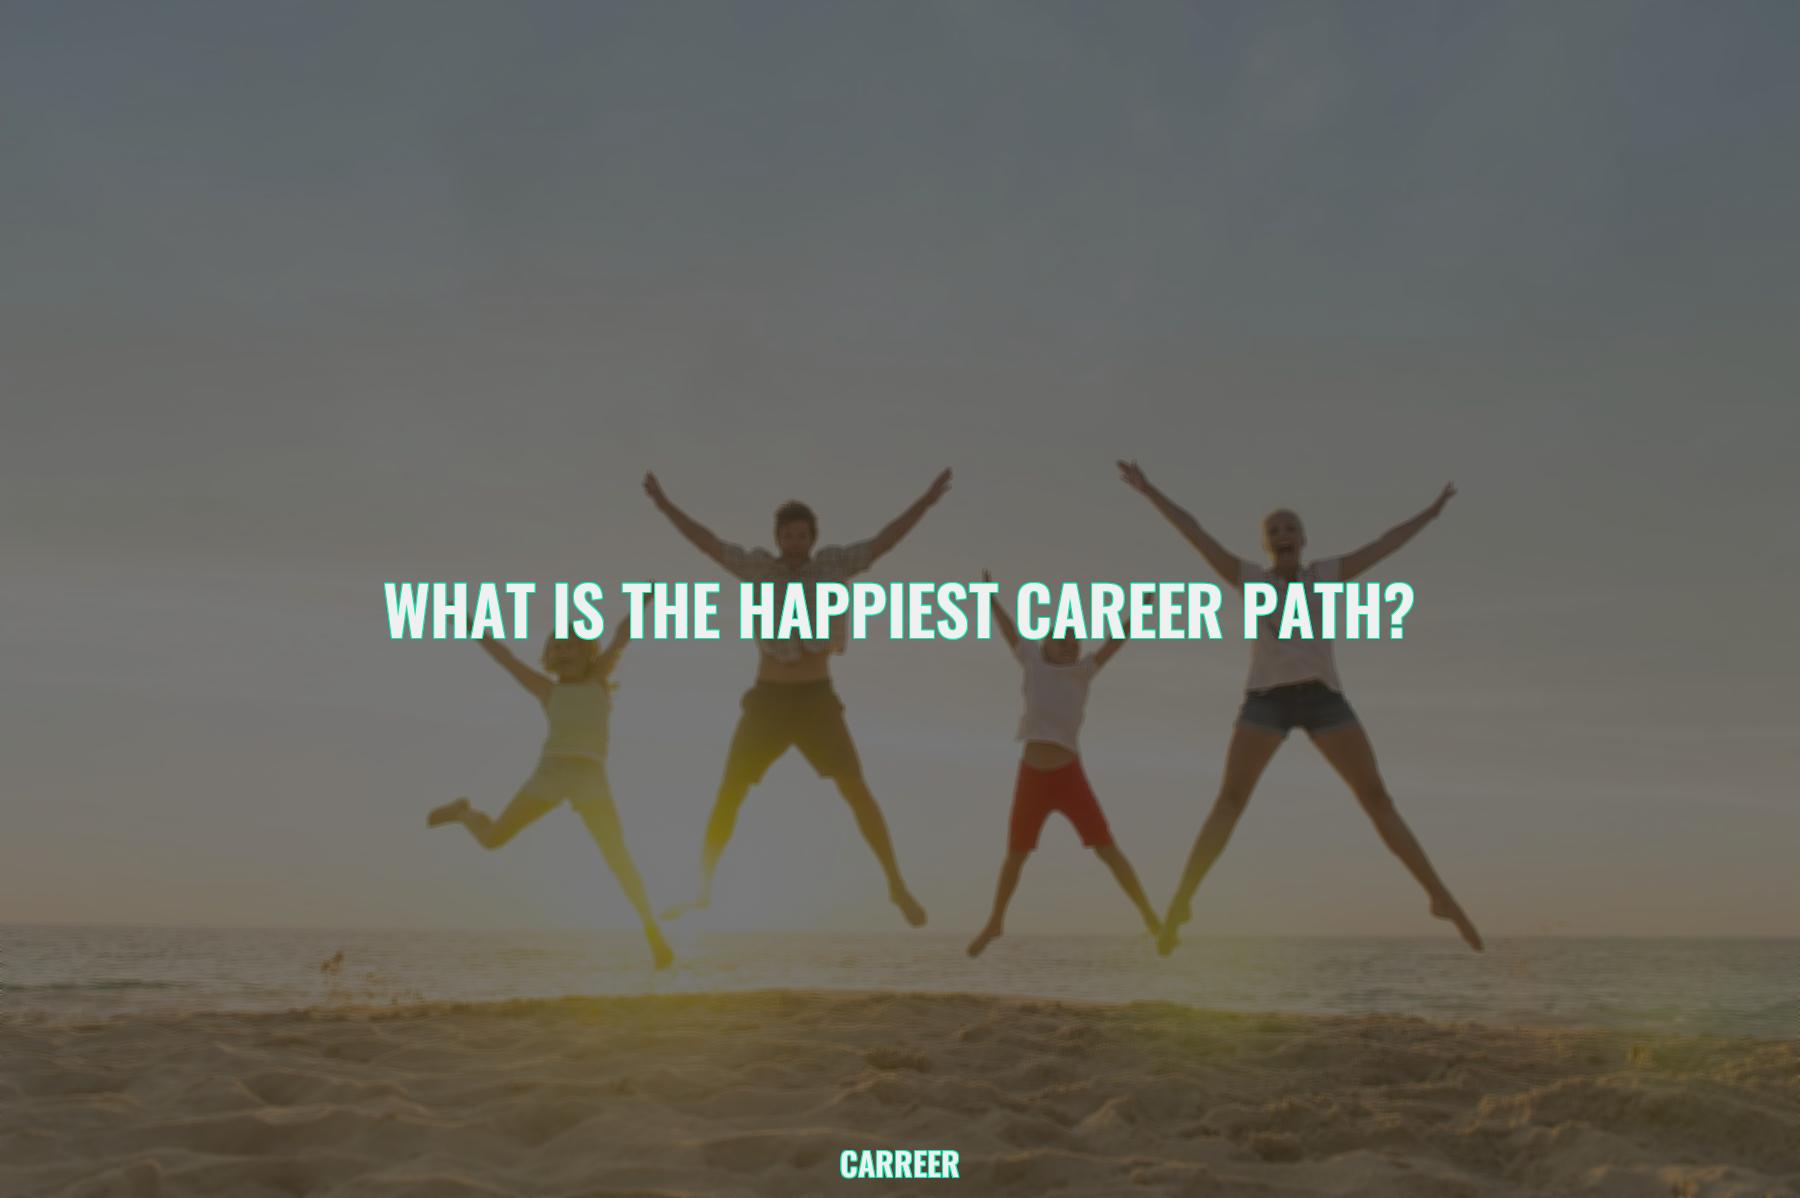 What is the happiest career path?